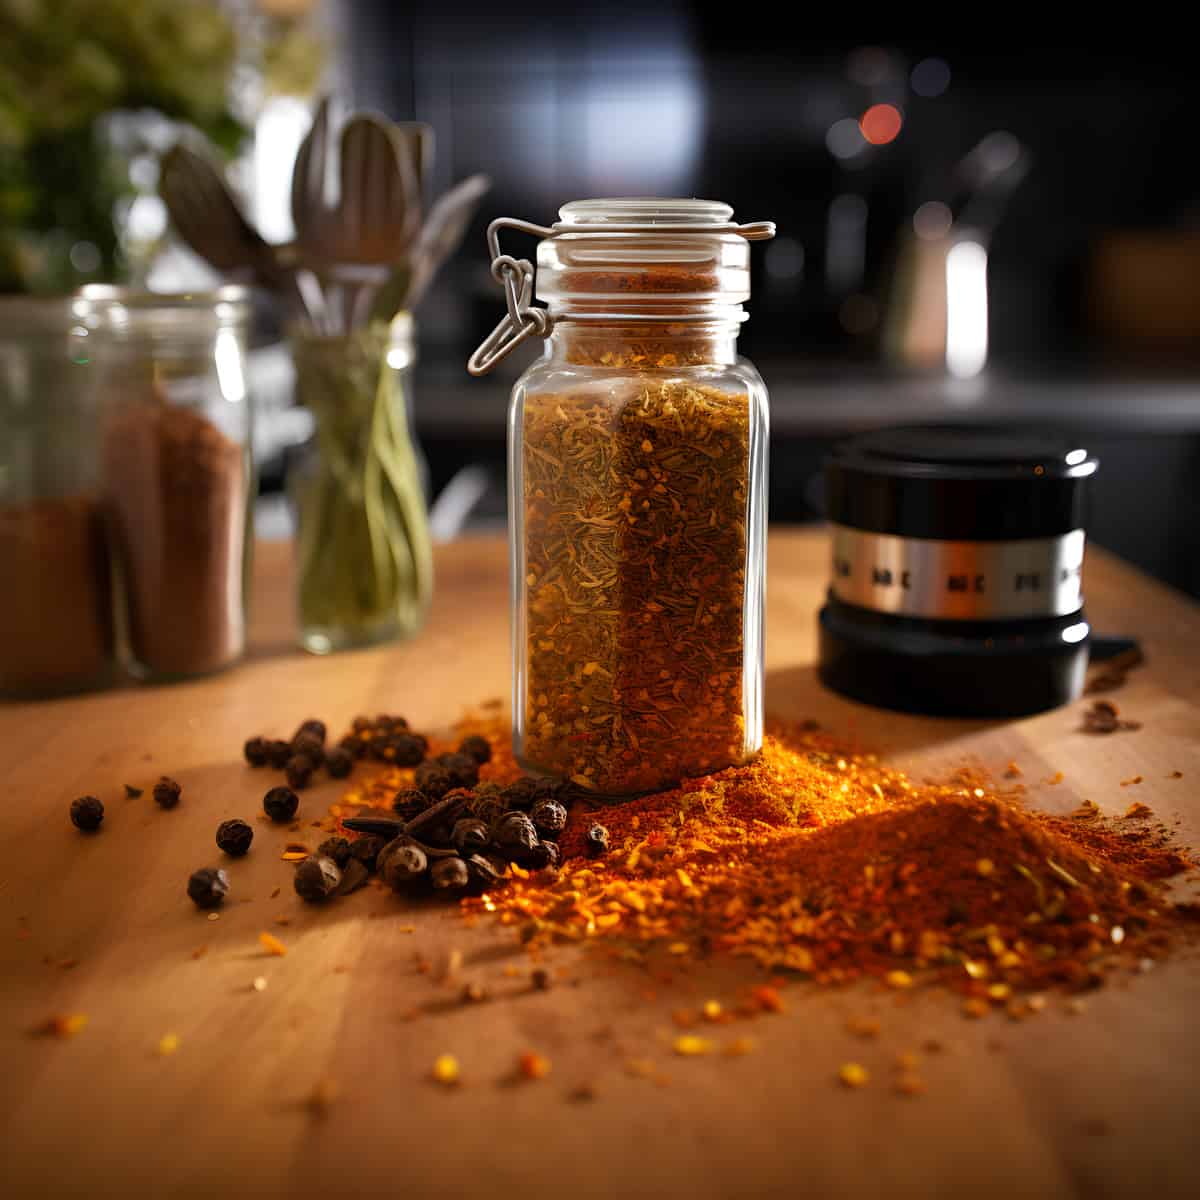 Mace Spice on a kitchen counter